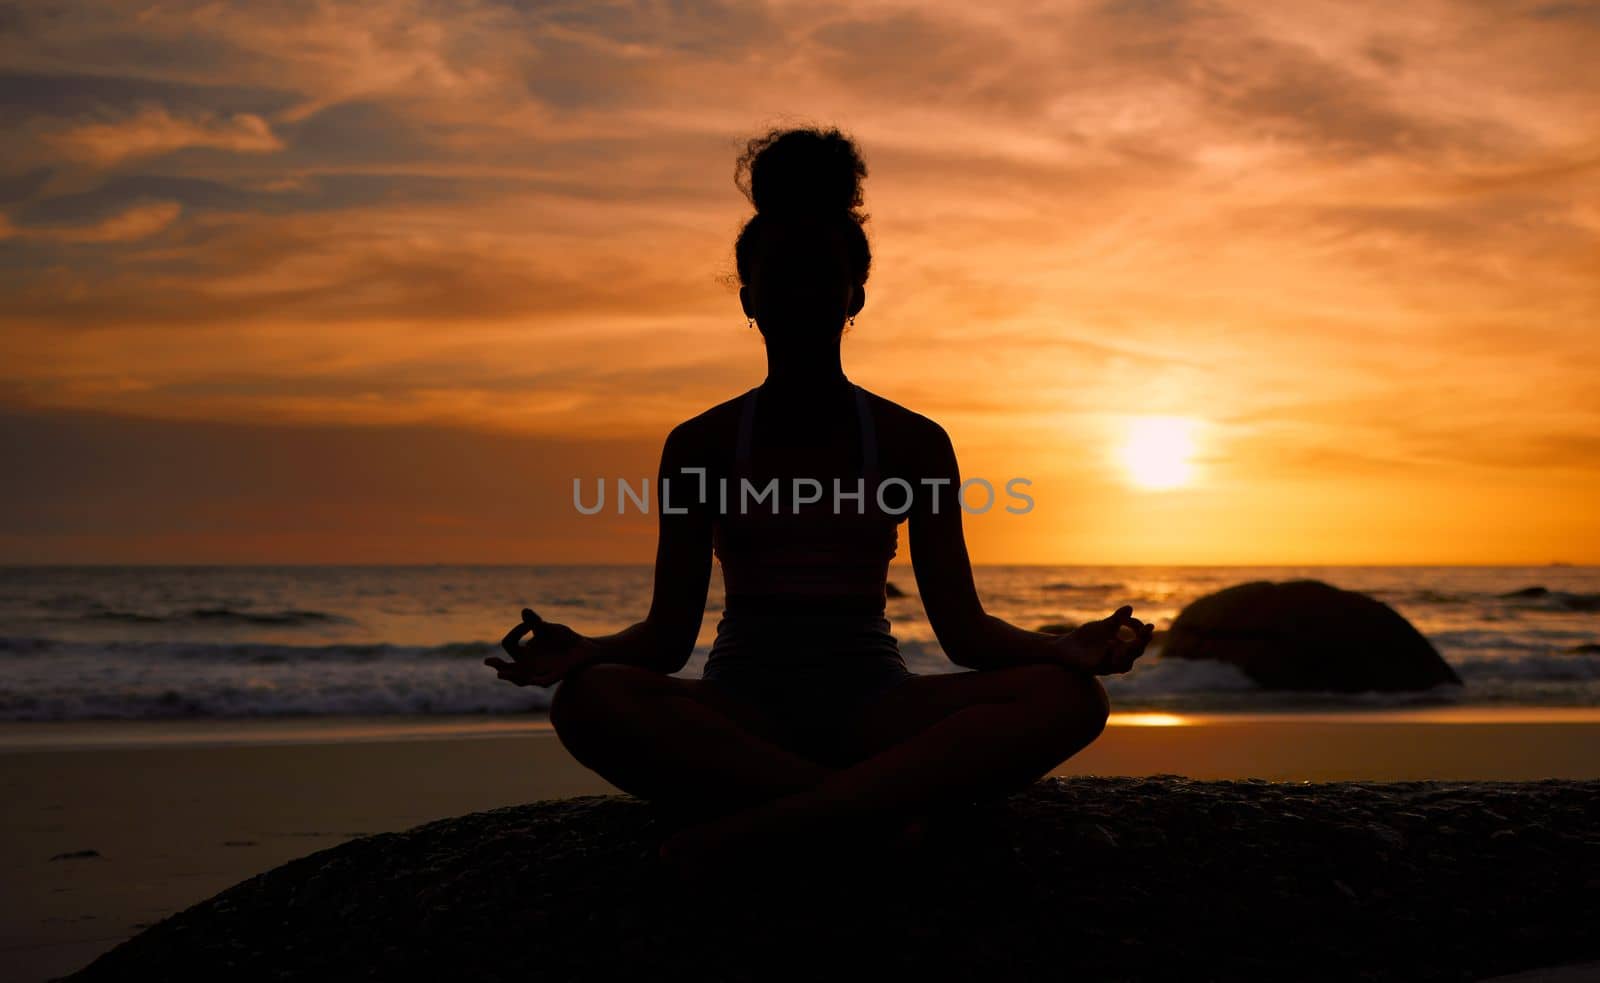 Sunset, beach and silhouette of a woman in a lotus pose while doing a yoga exercise by the sea. Peace, zen and shadow of a calm female doing meditation or pilates workout outdoor at dusk by the ocean.